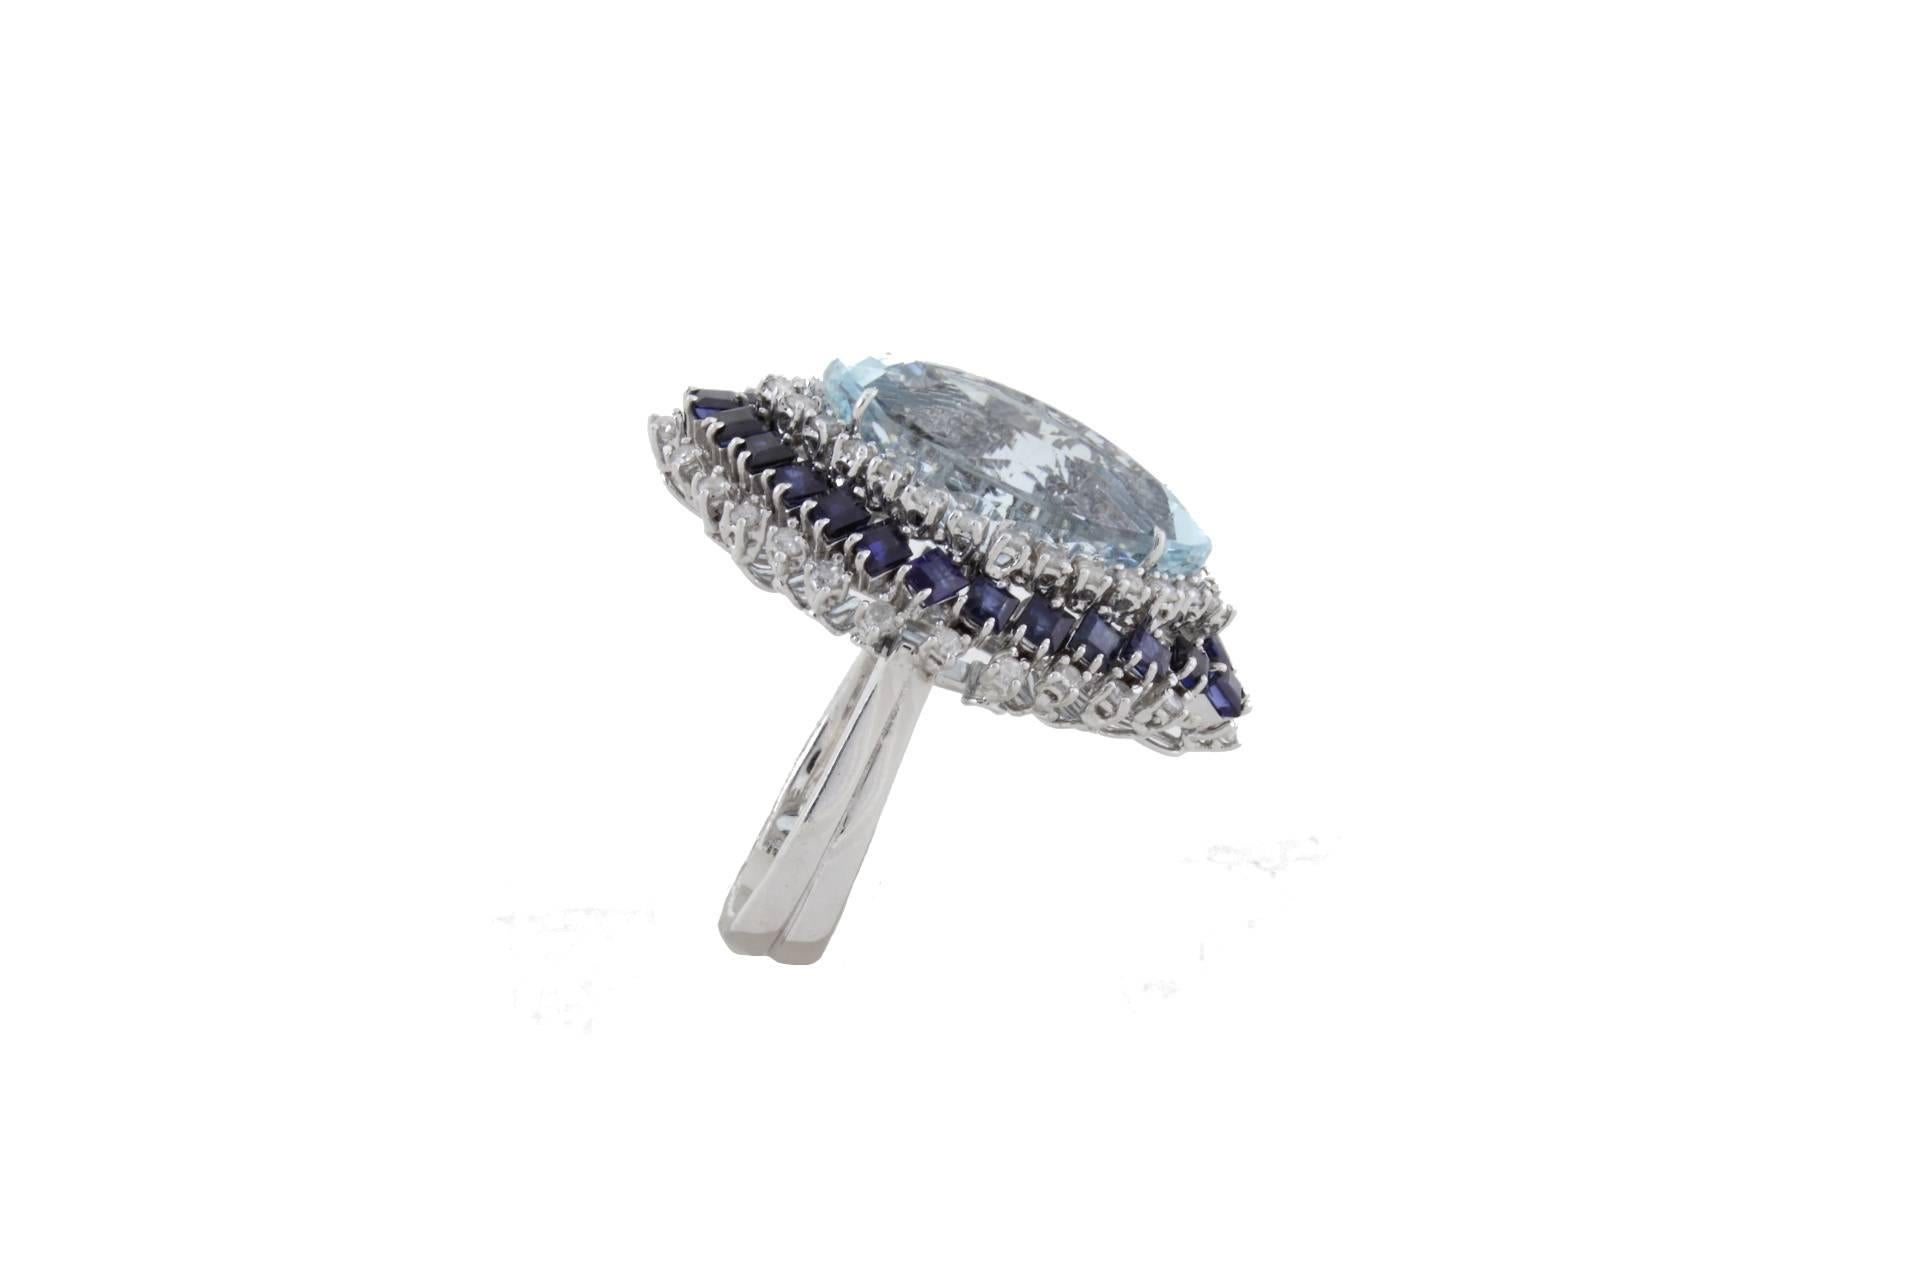 SHIPPING POLICY:
No additional costs will be added to this order.
Shipping costs will be totally covered by the seller (customs duties included).

Enhance your look with this charming ring in 14Kt white gold, composed of a crown of diamonds and blue